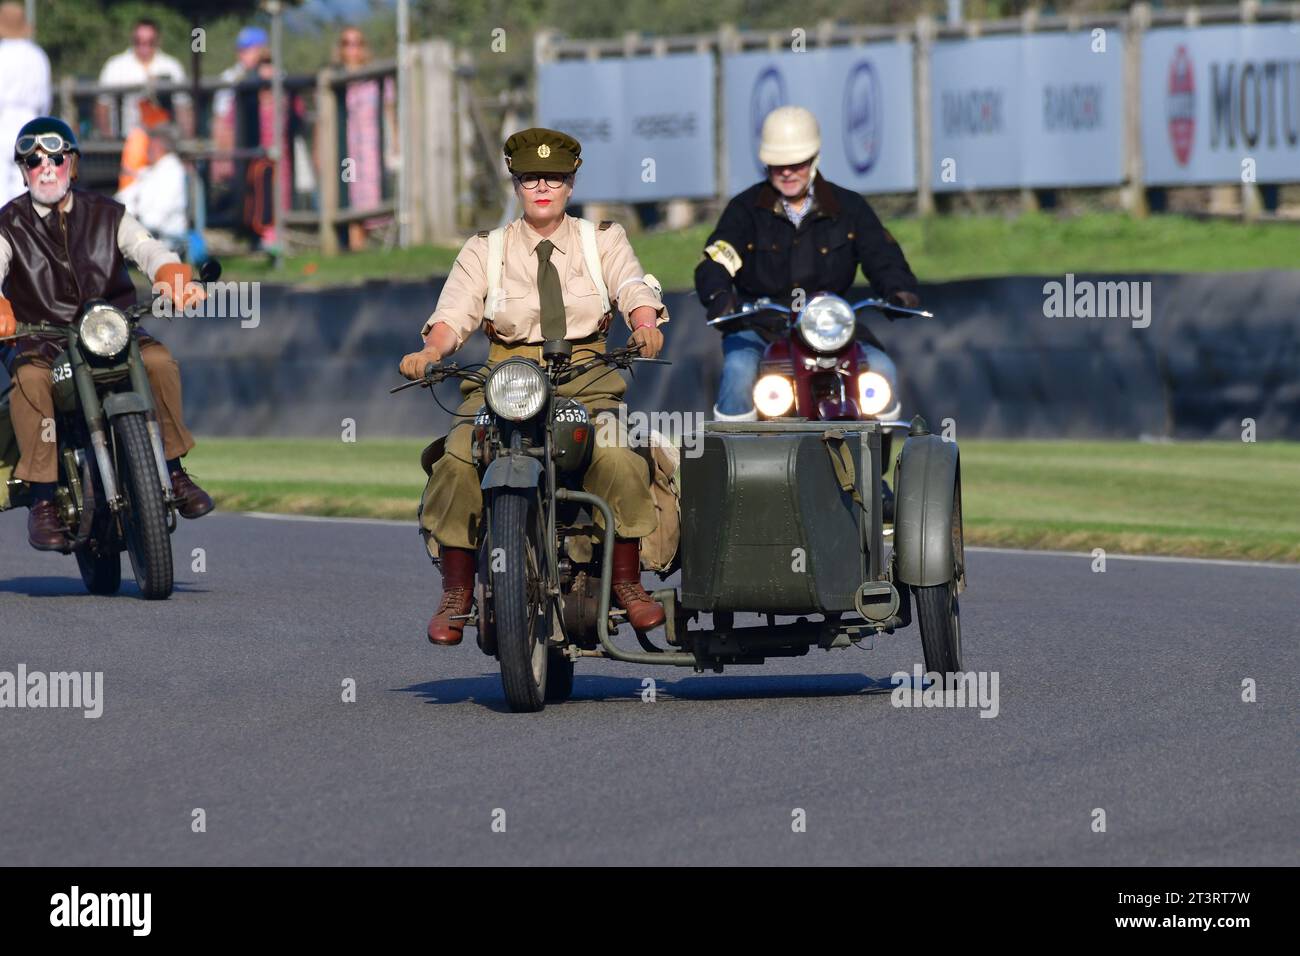 ex-military BSA Combination, Track Parade - Motorcycle Celebration, circa 200 bikes featured in the morning parade laps, including sidecar outfits and Stock Photo